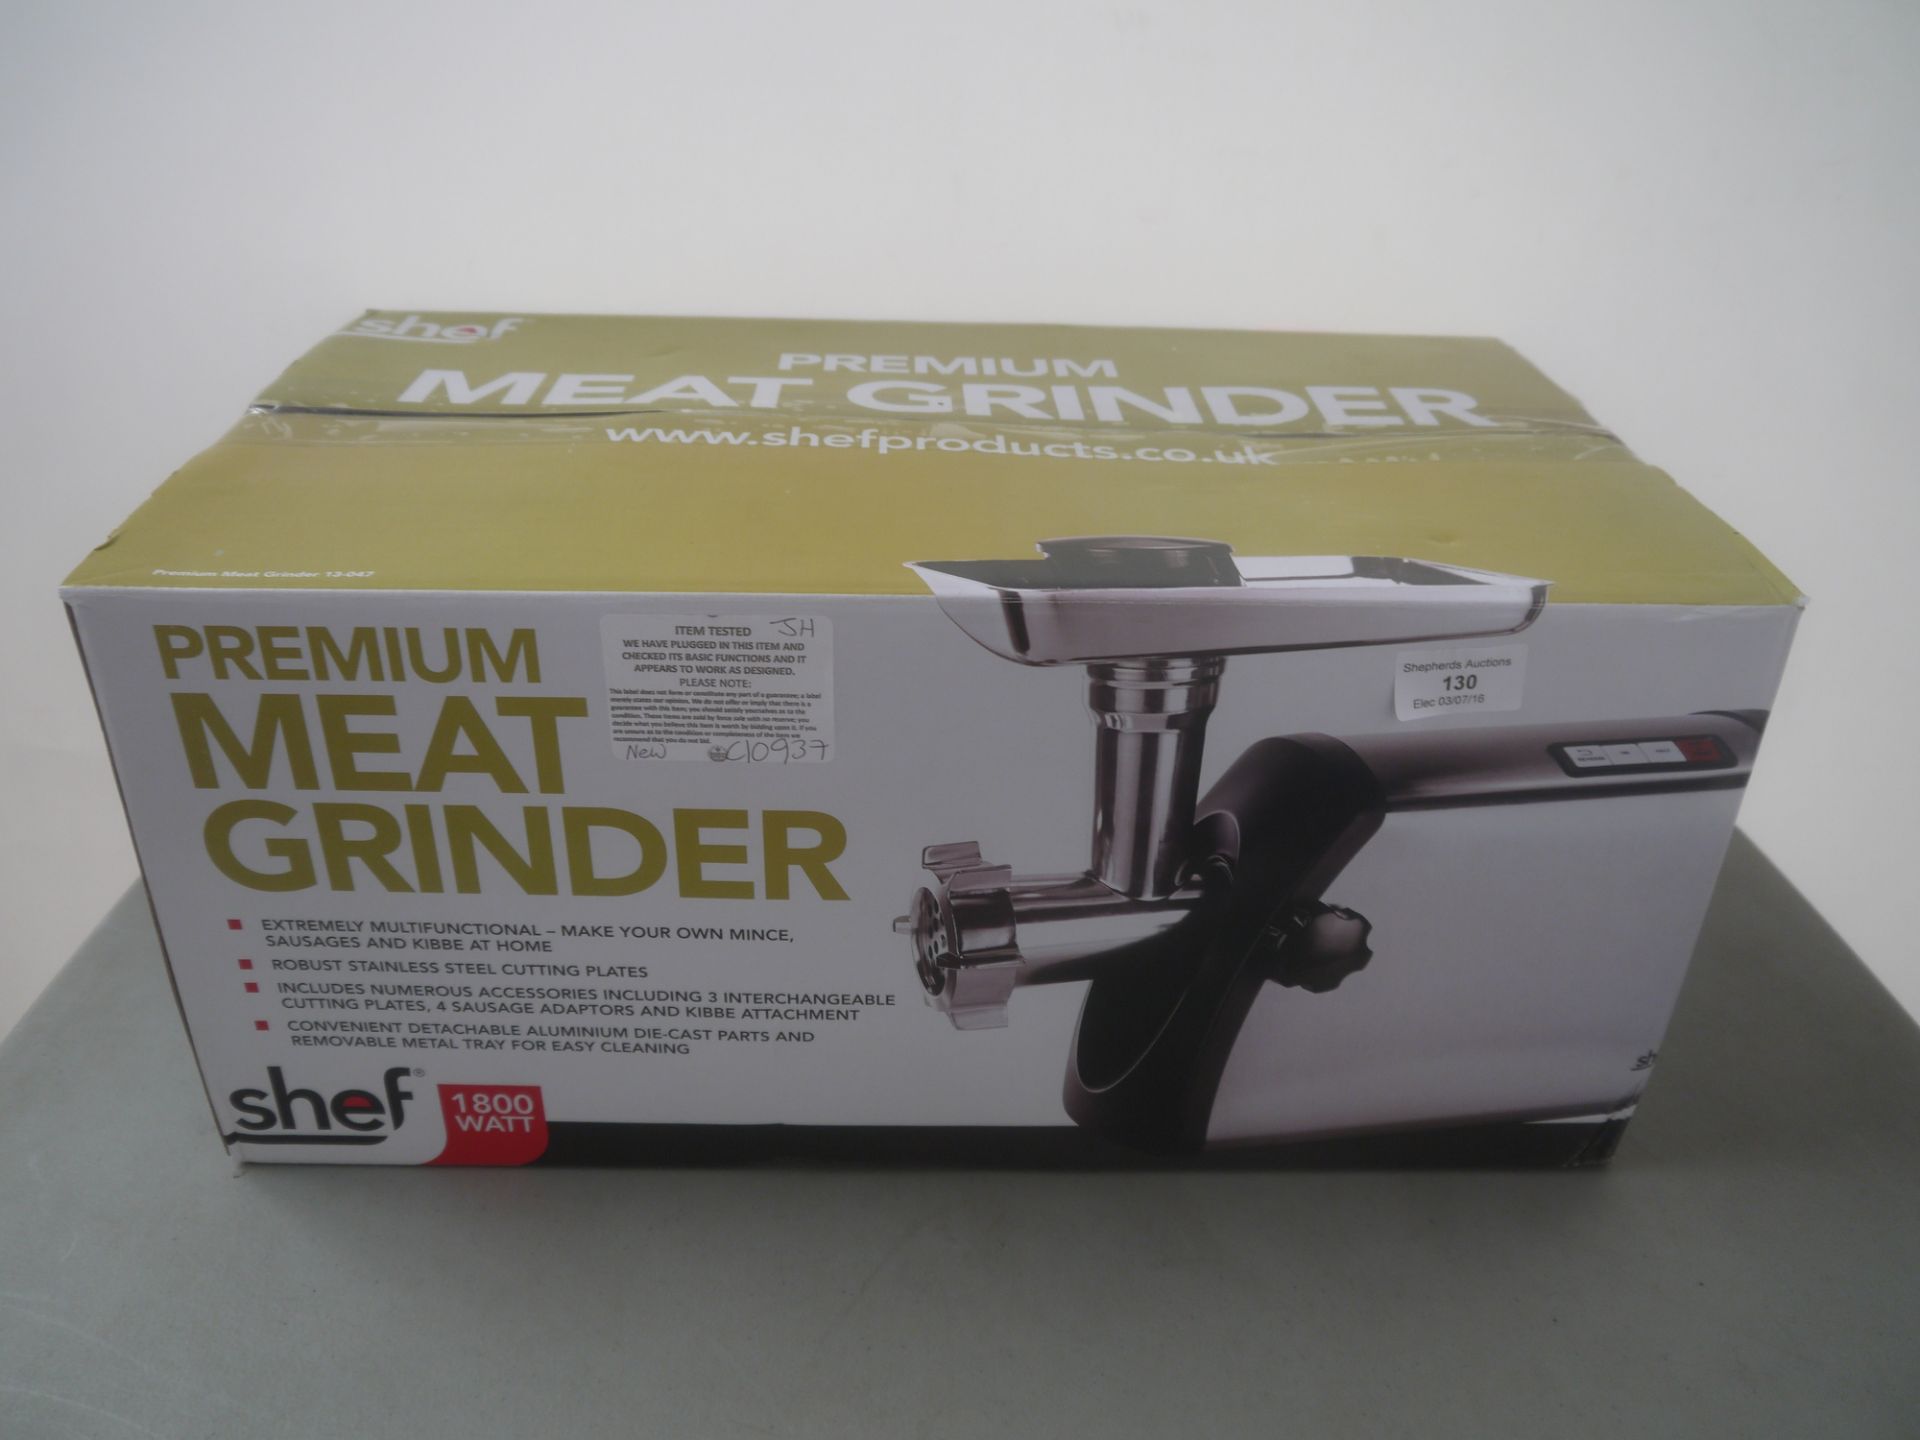 VonSHef premium meat grinder, stainless steel cutting blades, tested working and boxed.